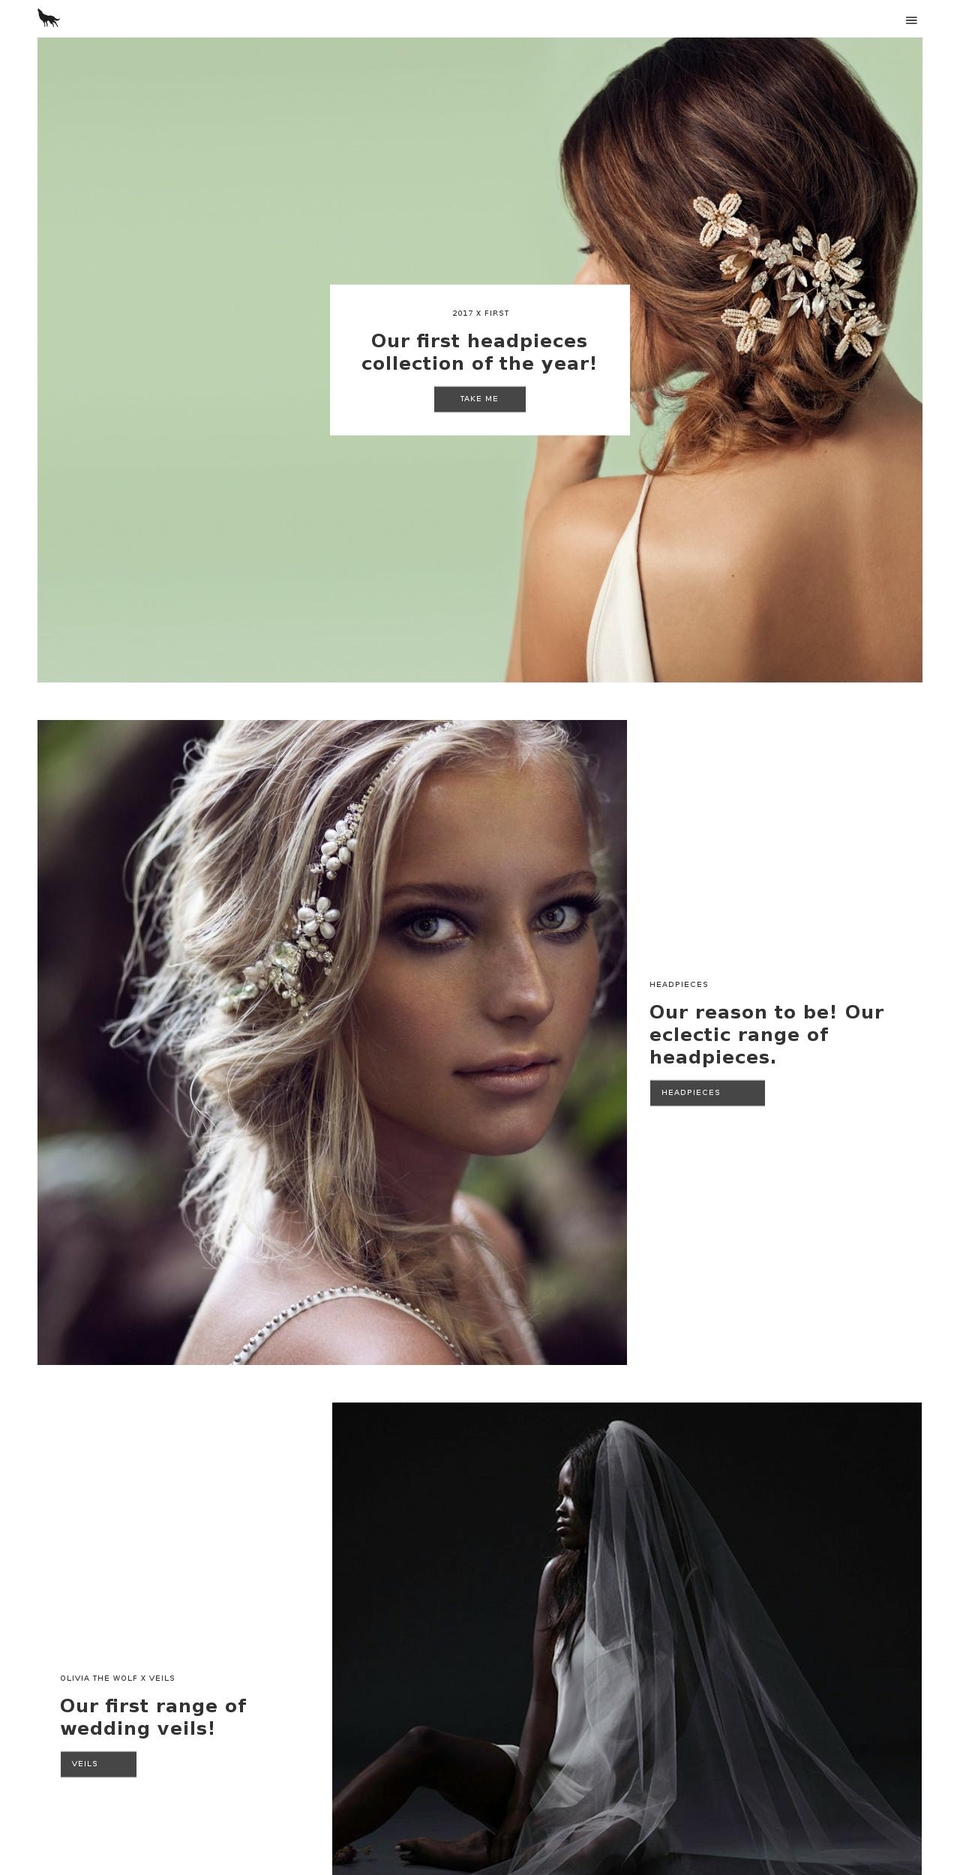 Maker Shopify theme site example oliviaheadpieces.com